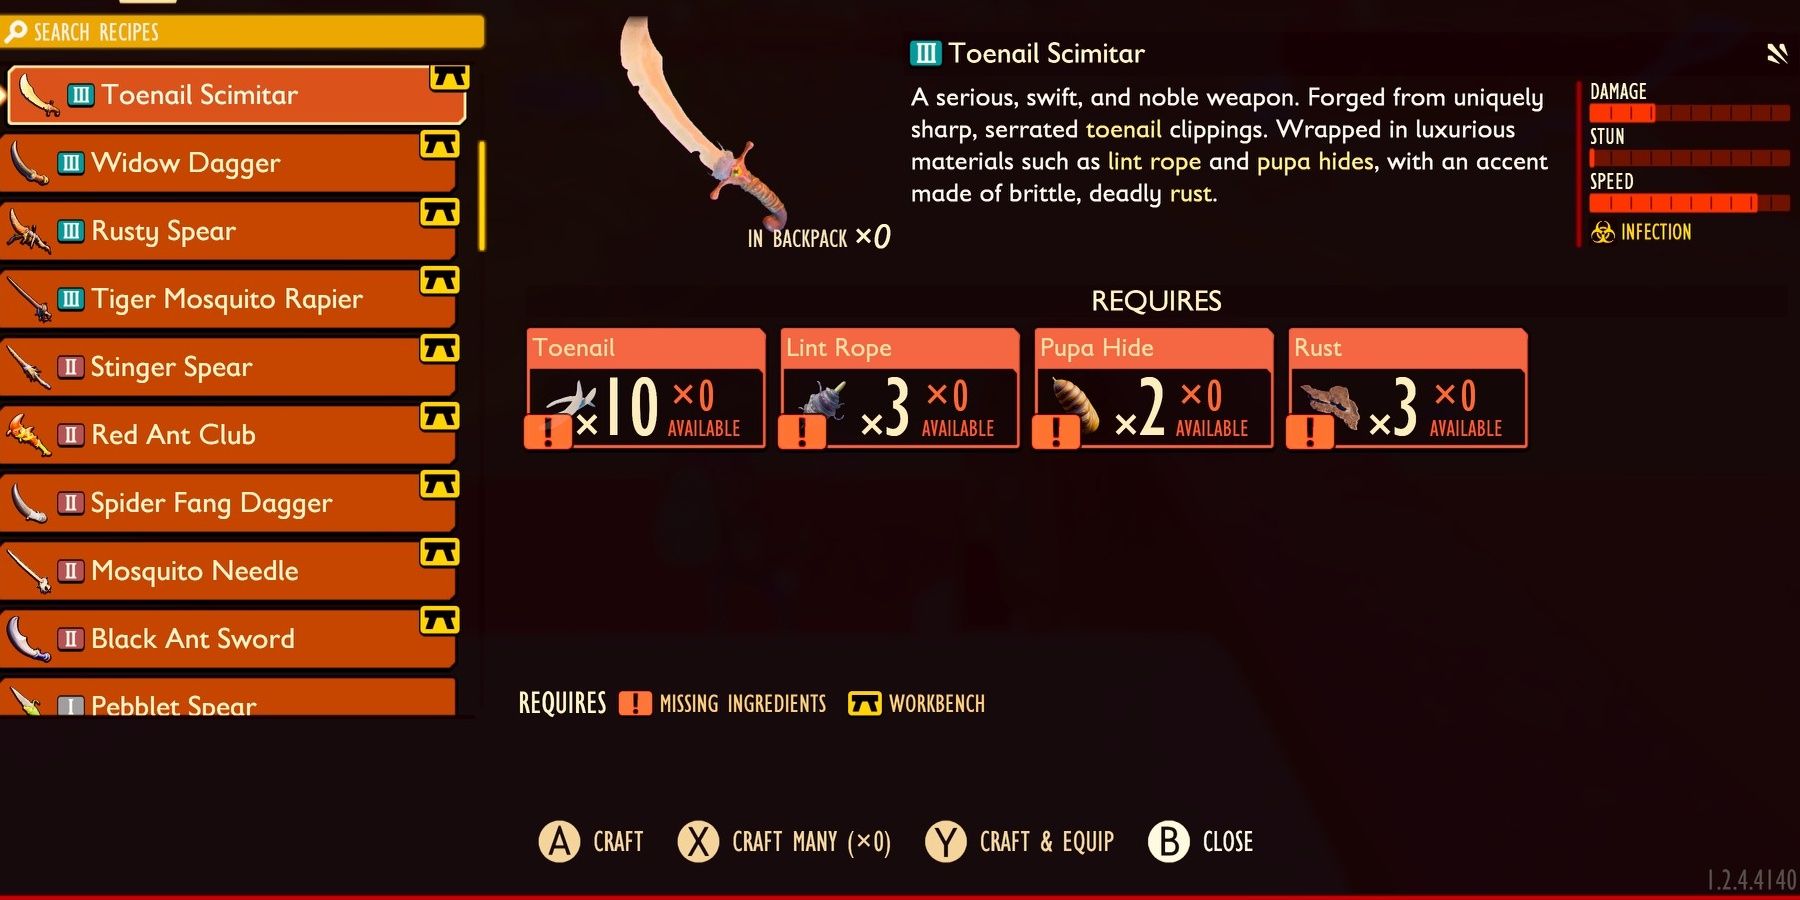 The Toenail Scimitar and its crafting requirements in Grounded.